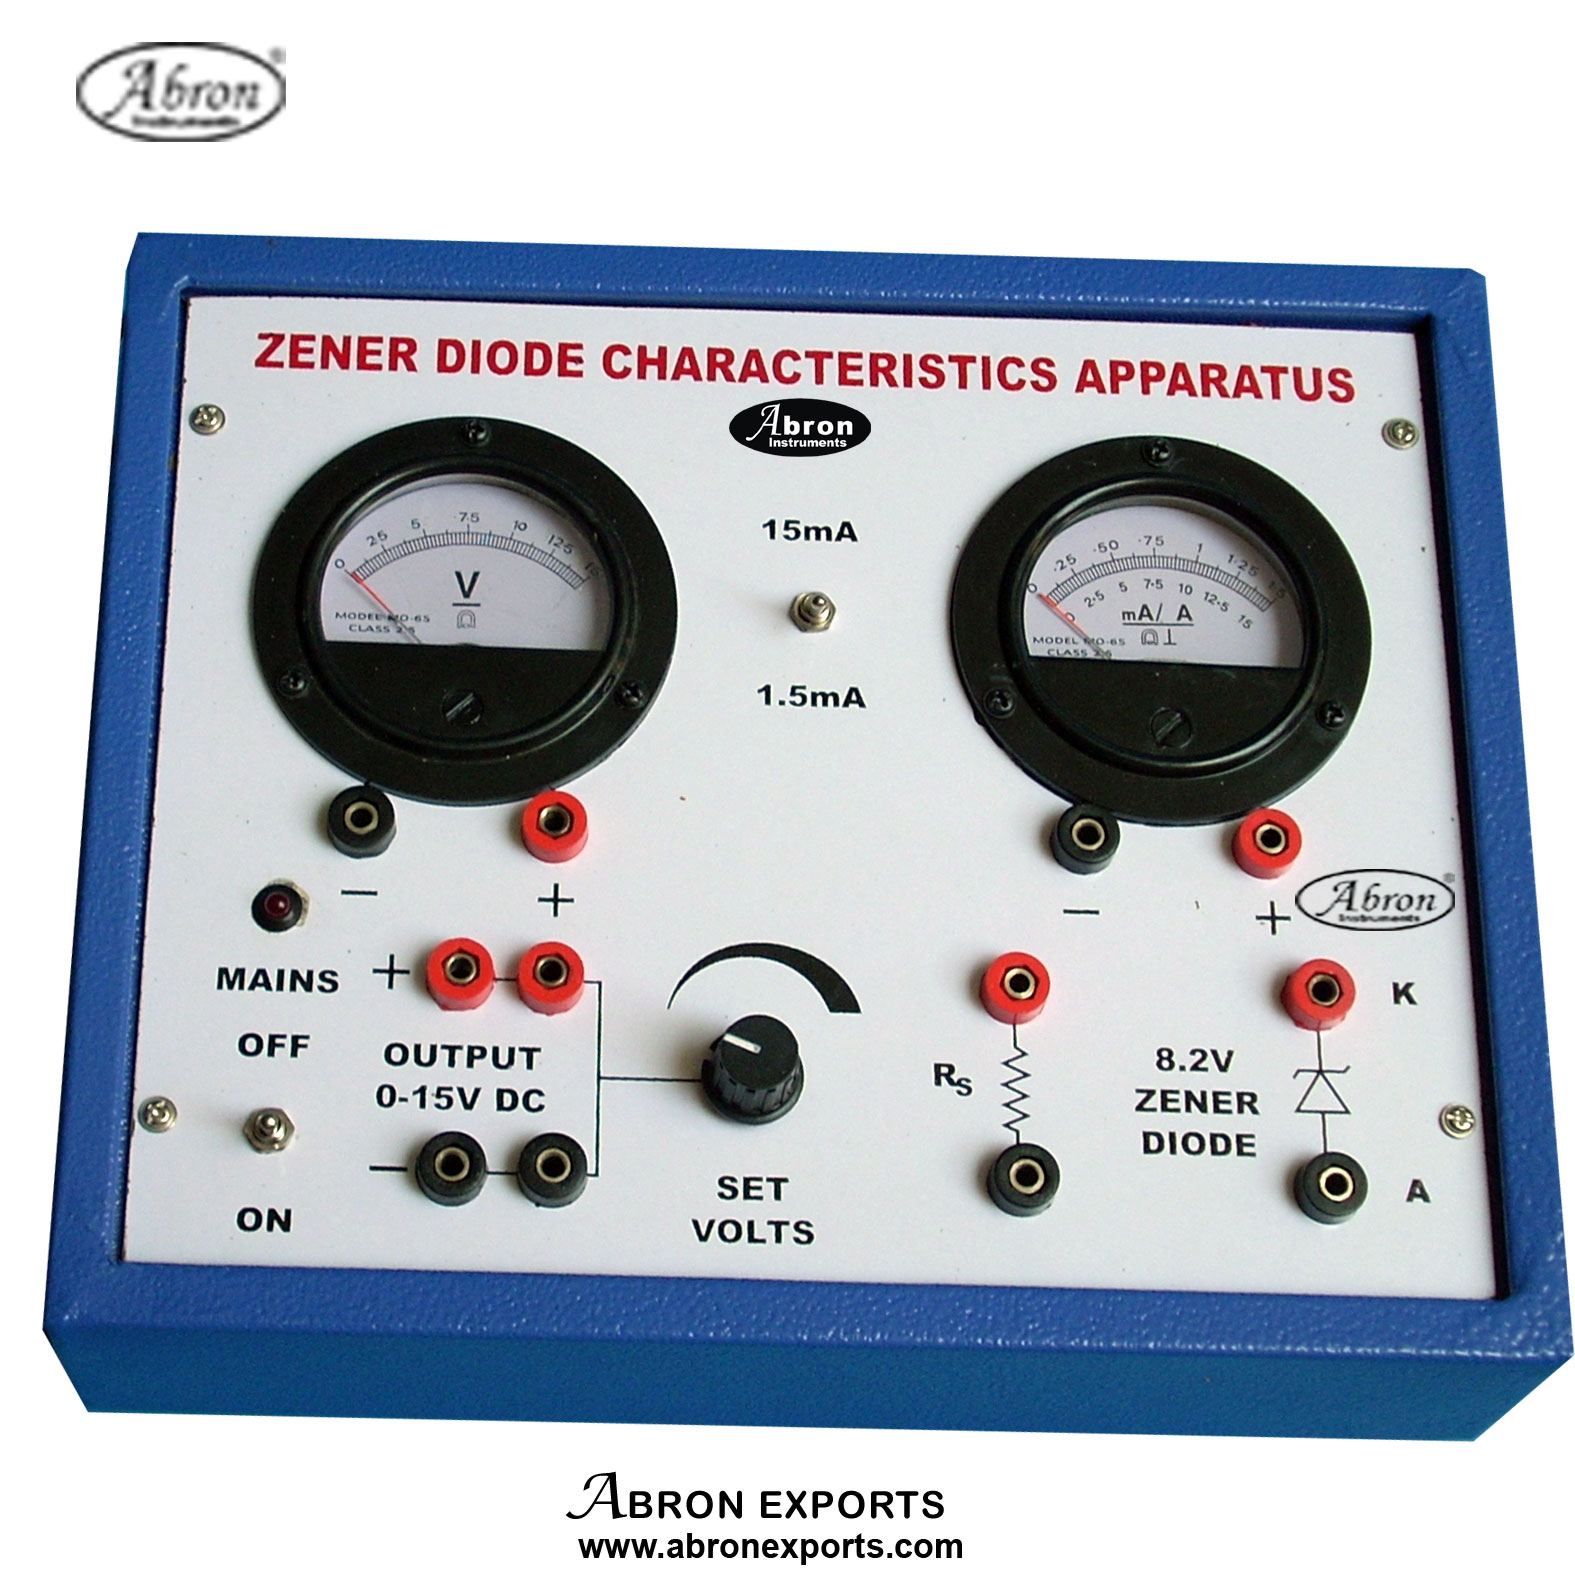 Zener diode  characteristics Apparatus with 2 meter with power supply Abron